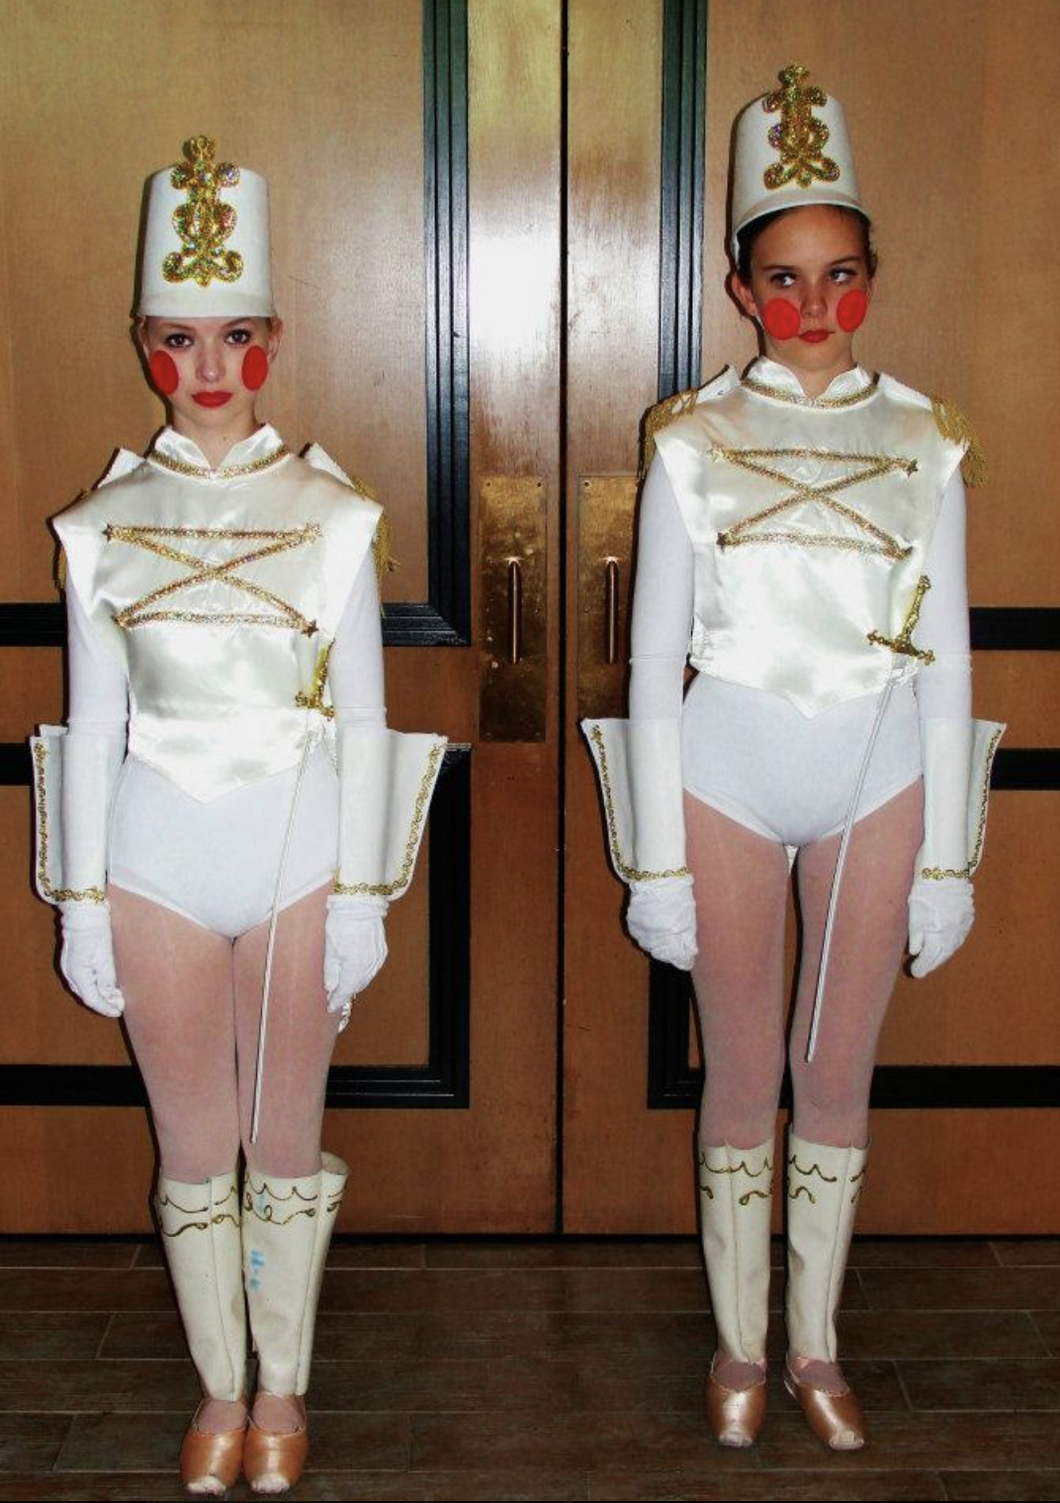 'Make Sure You Stay Warm,' And 9 More Tips And Tricks For Surviving This 'Nutcracker' Season